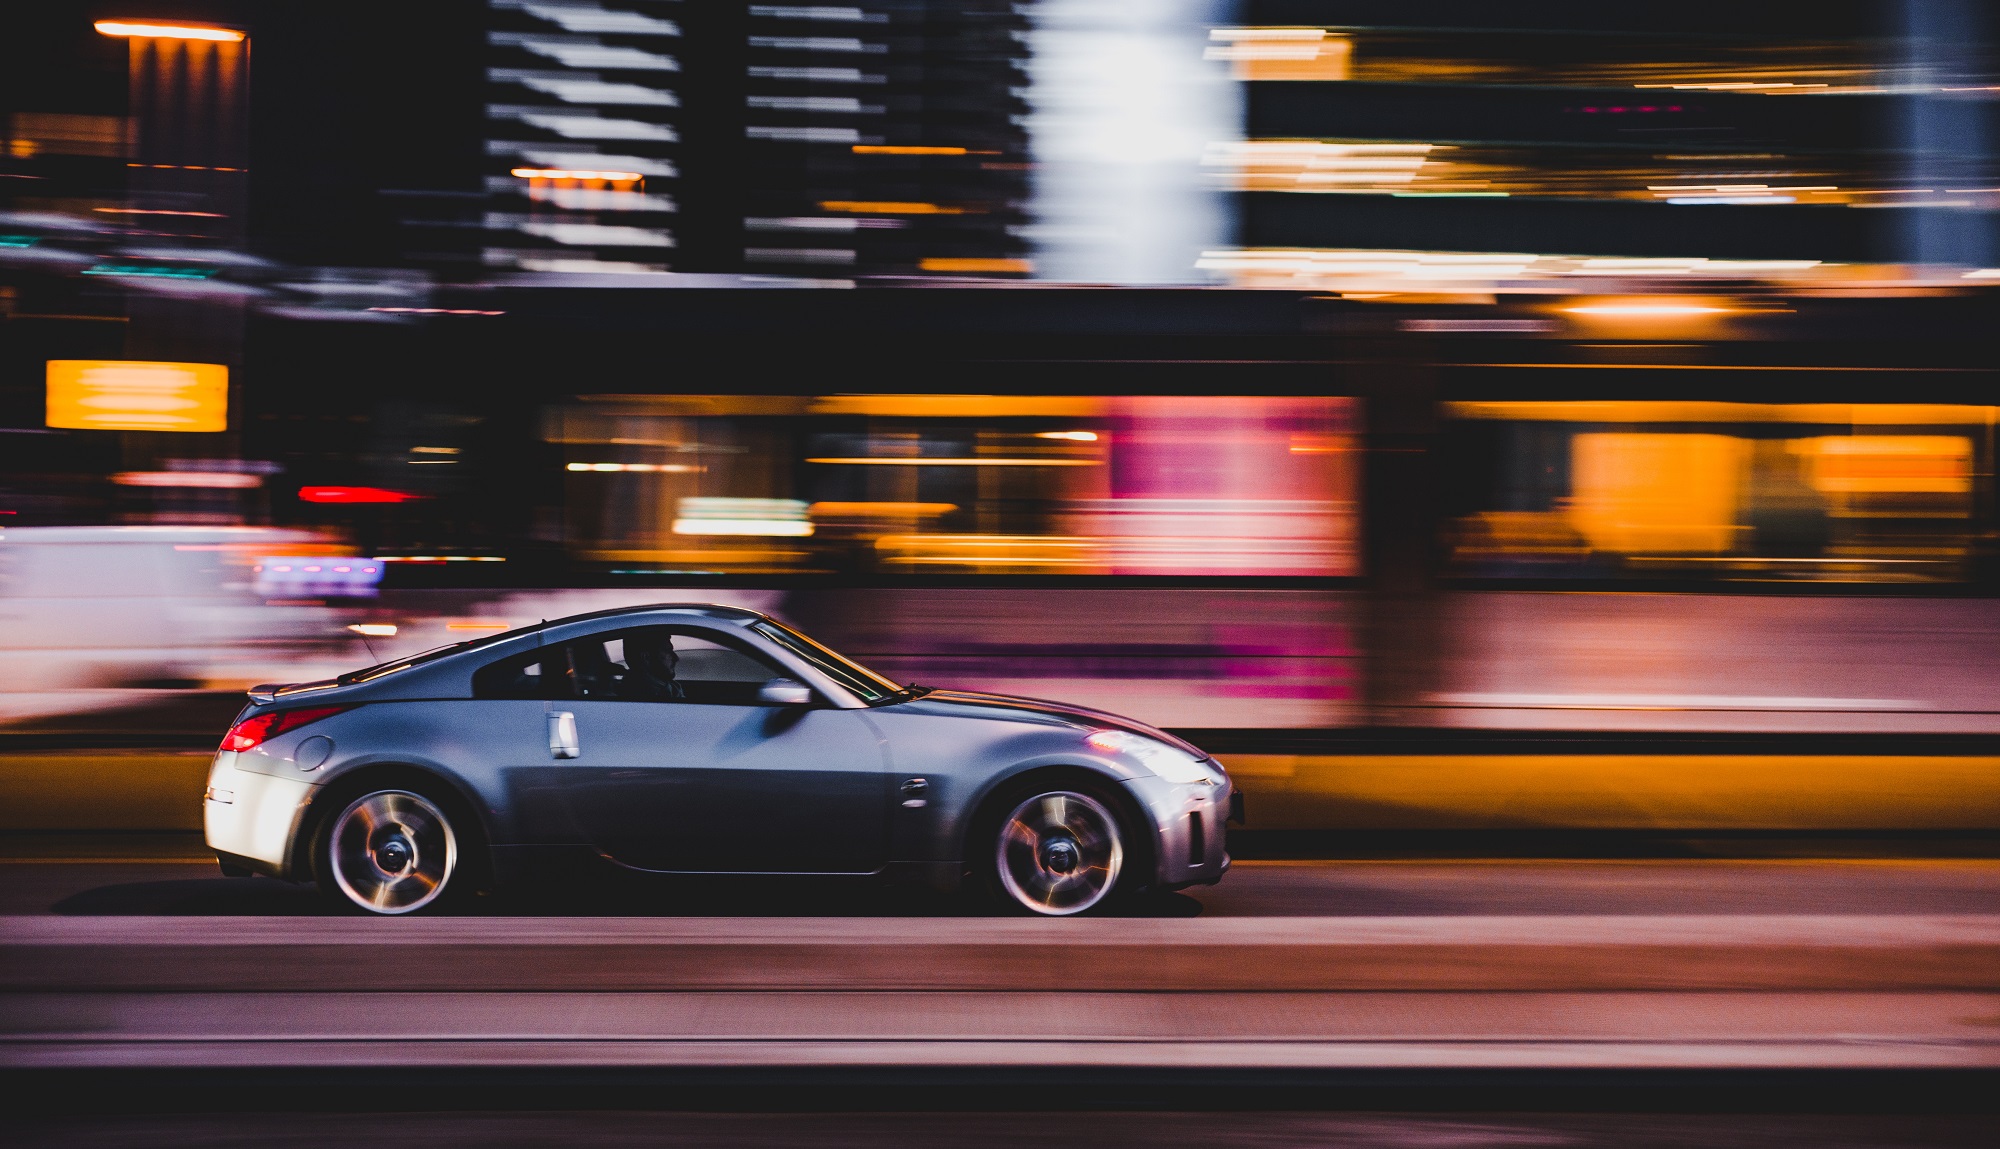 Why Google’s Need for Speed May Hurt Your Website Traffic